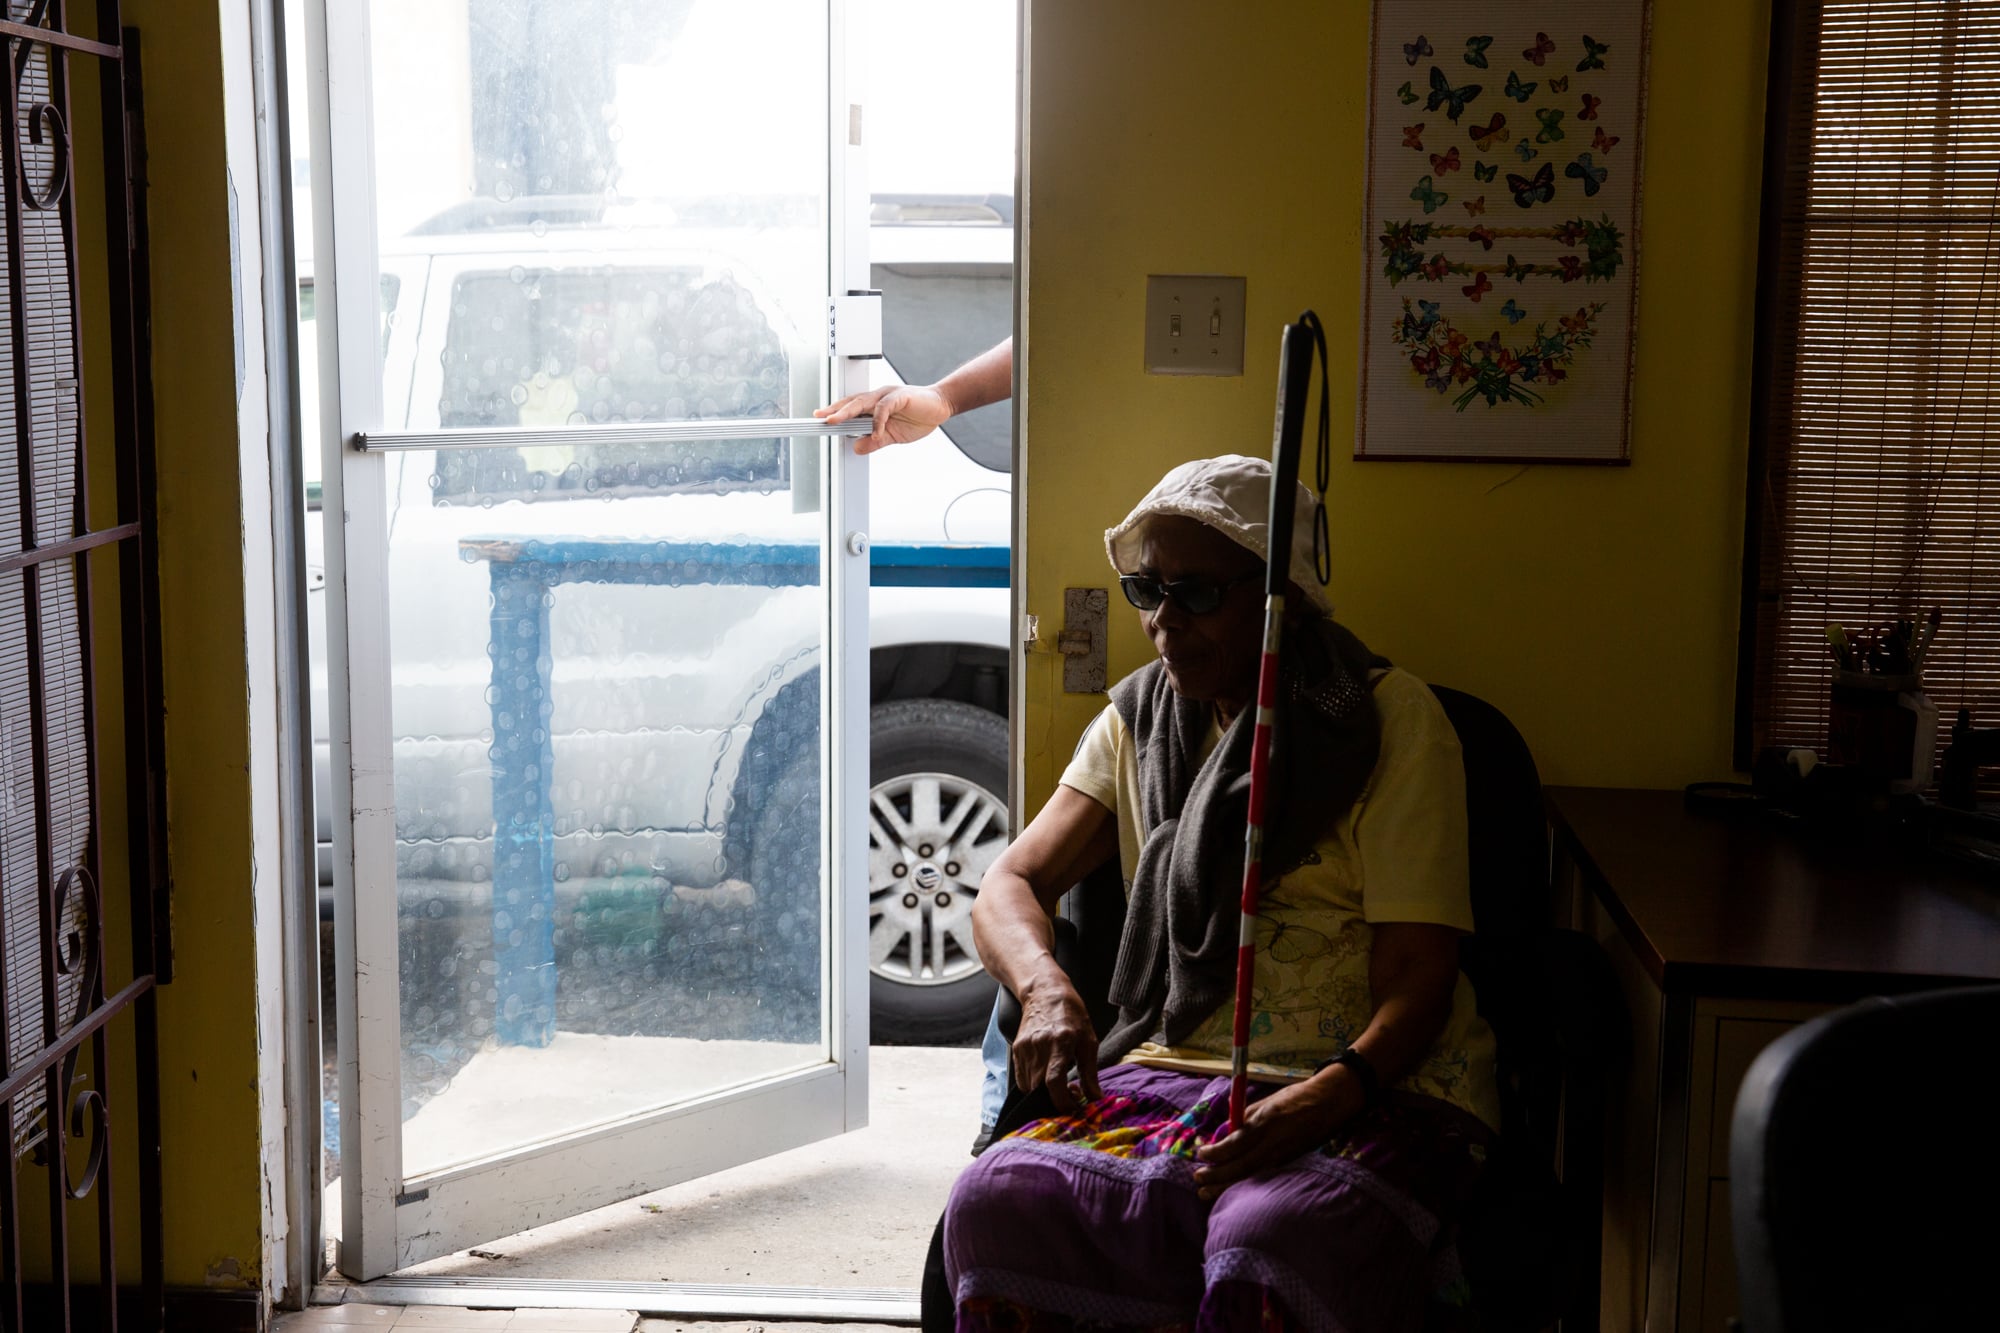 Mable Powell, who is blind, waits for a paratransit bus to pick her up after a meeting of the Virgin Islands Association for Independent Living. Virgin Islands Transit, run by the territorial government, provides transportation to people who can't drive themselves. (Anya Magnuson/News21)